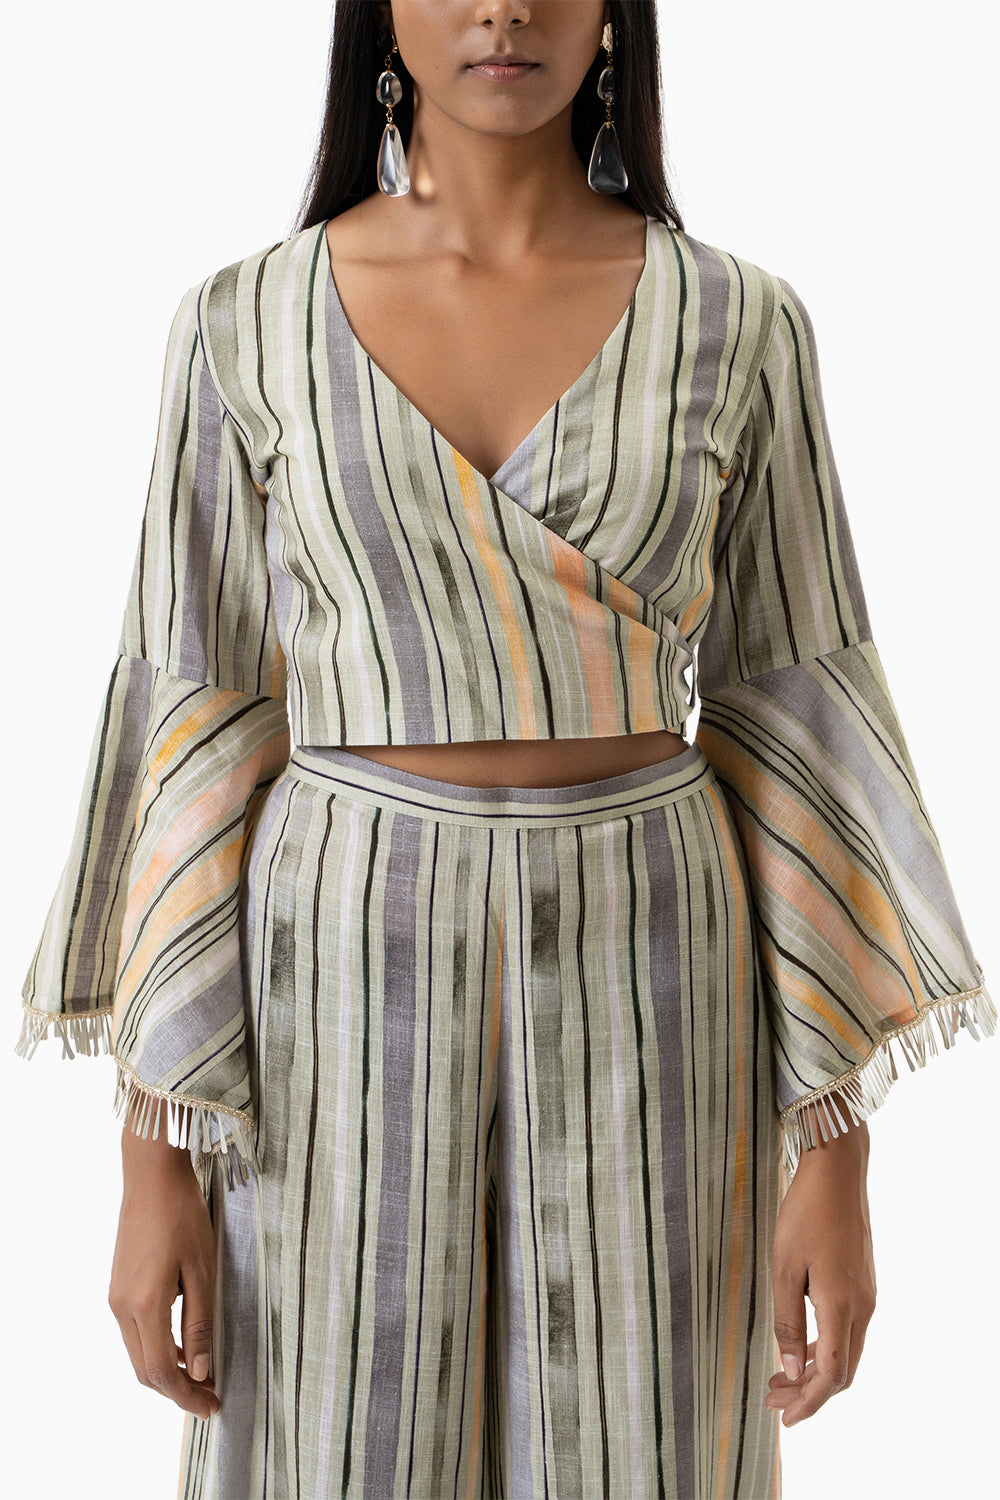 Green and grey printed stripes co-ord set